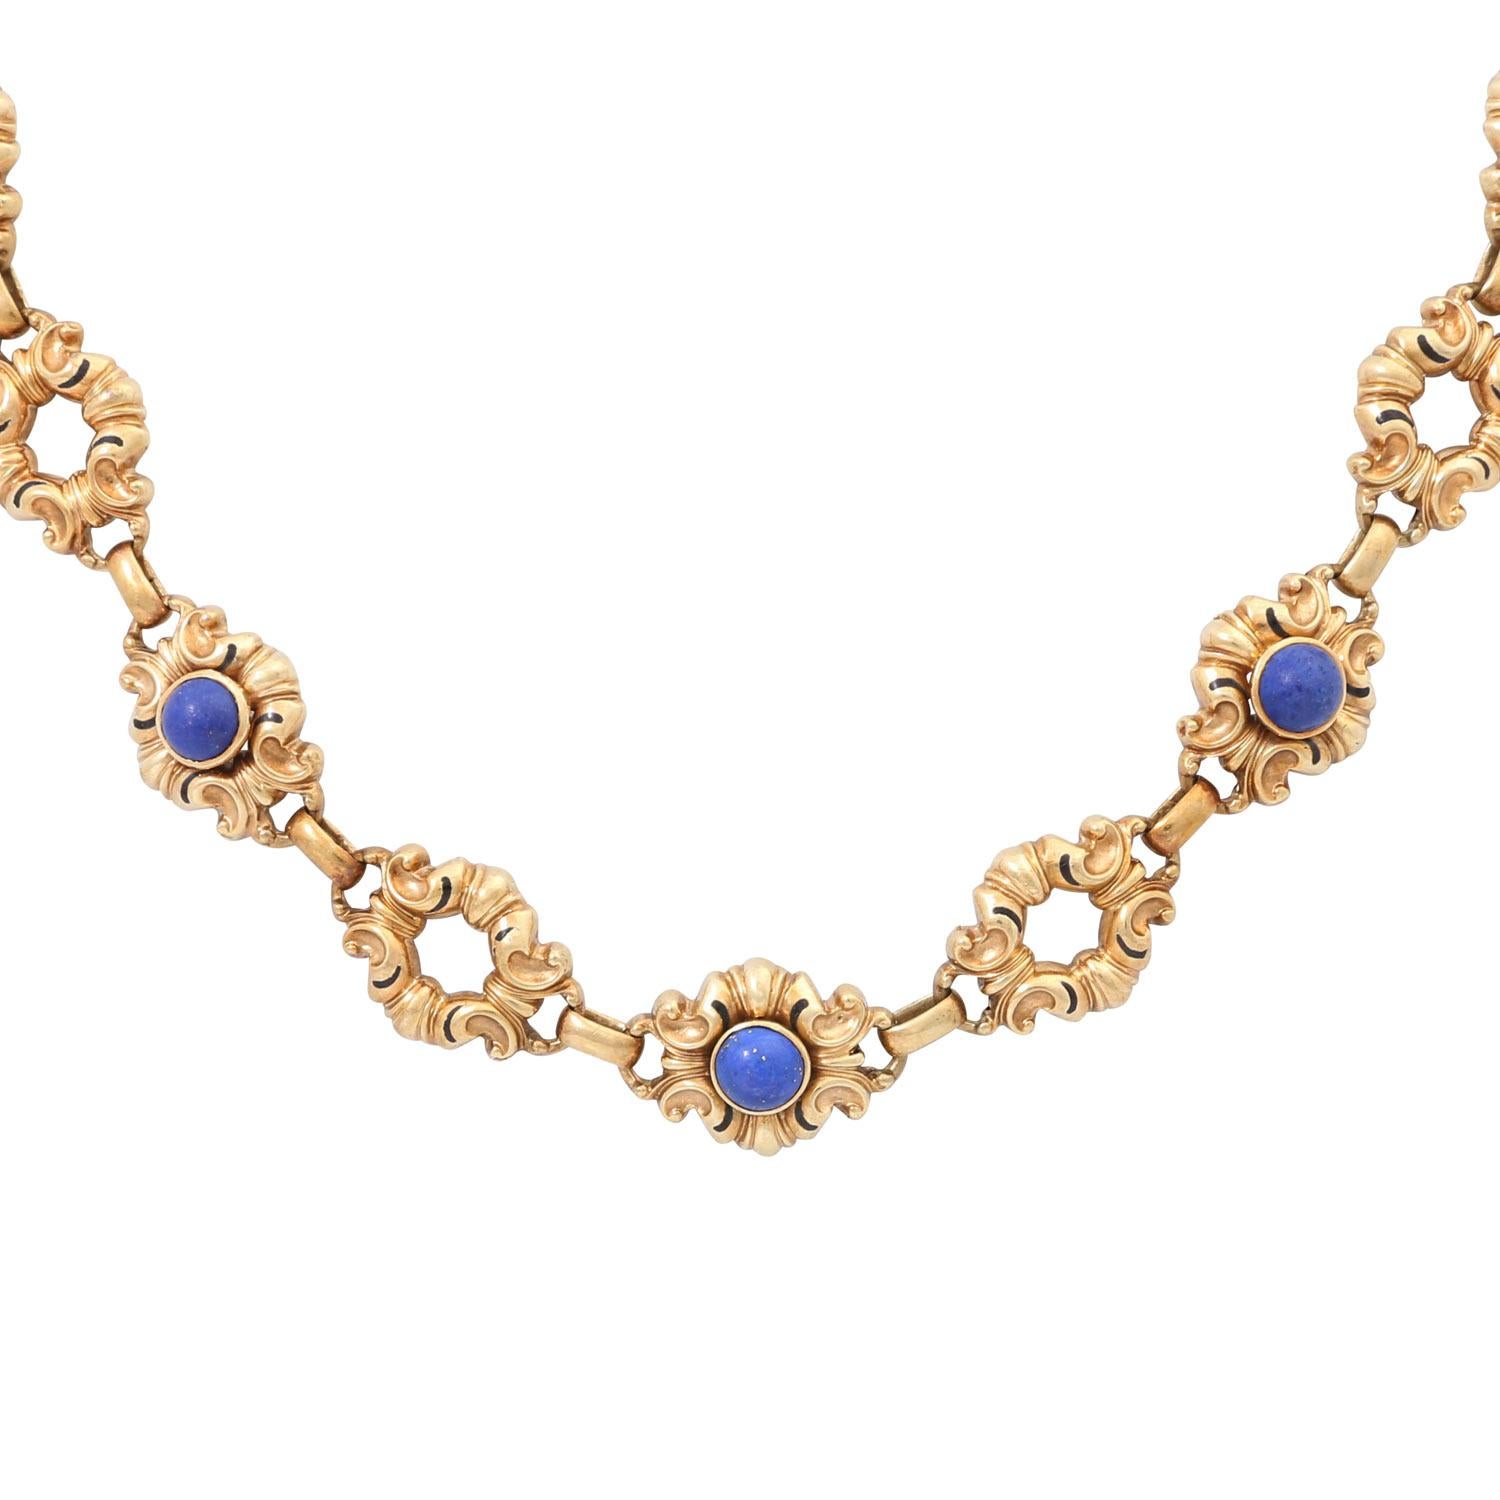 14K yellow gold, partly black enamelled, 32 g, L: approx. 47 cm, 1st half of the 20th century, good age-related condition. Links worked in great detail.

 Necklace with lapis lazuli cabochons, 14K yellow gold, partly with black enamel, 32 g, L.